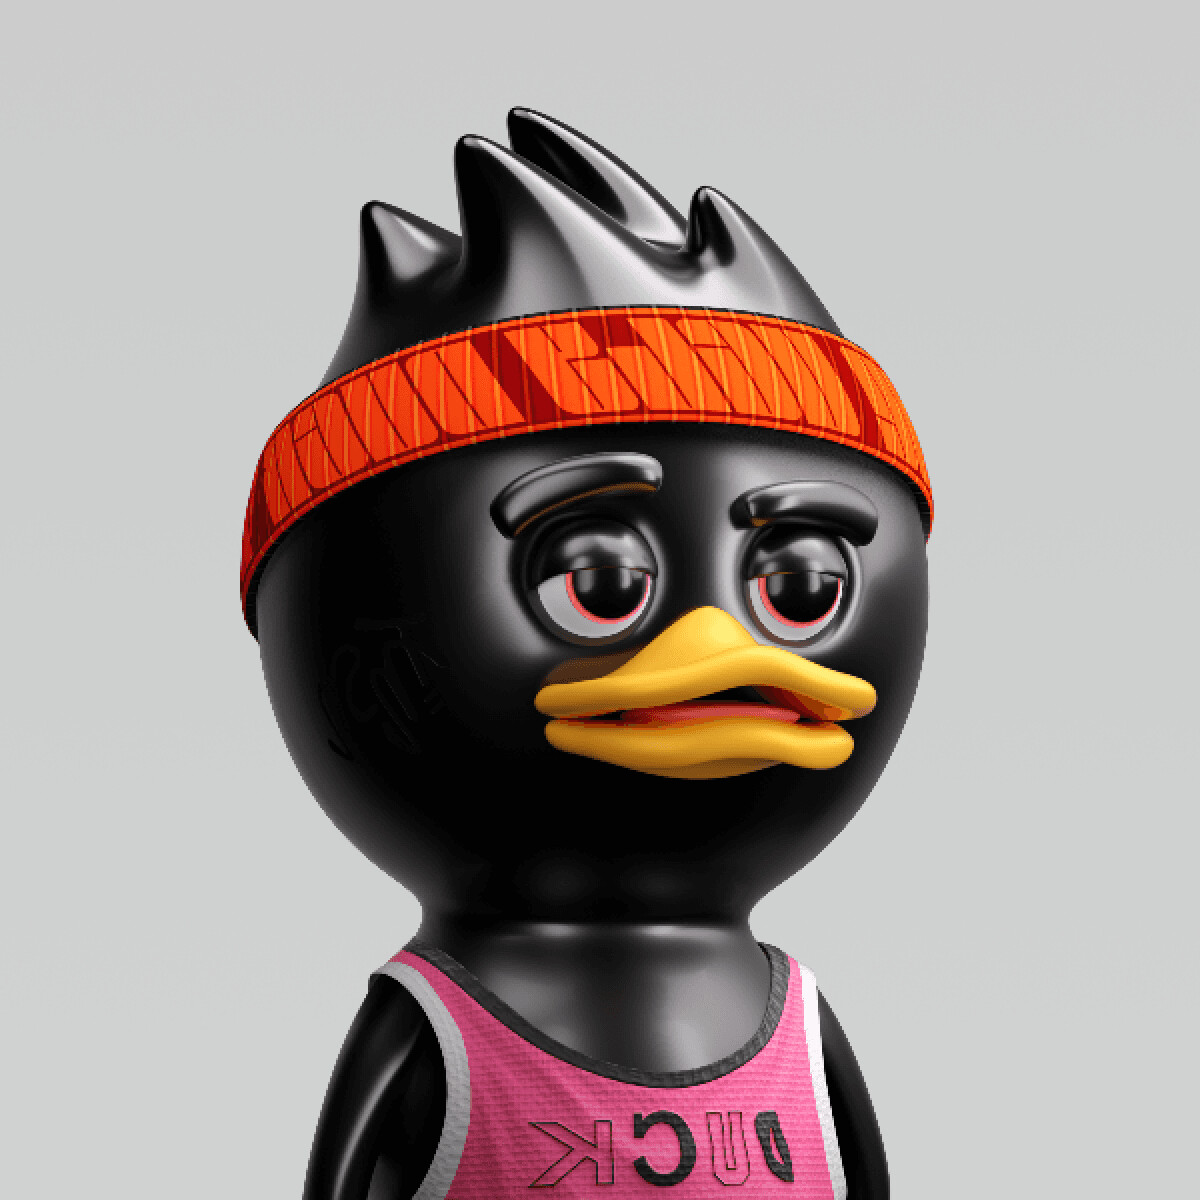 ArtStation - Royal Ugly Duck Official x ApexPixel